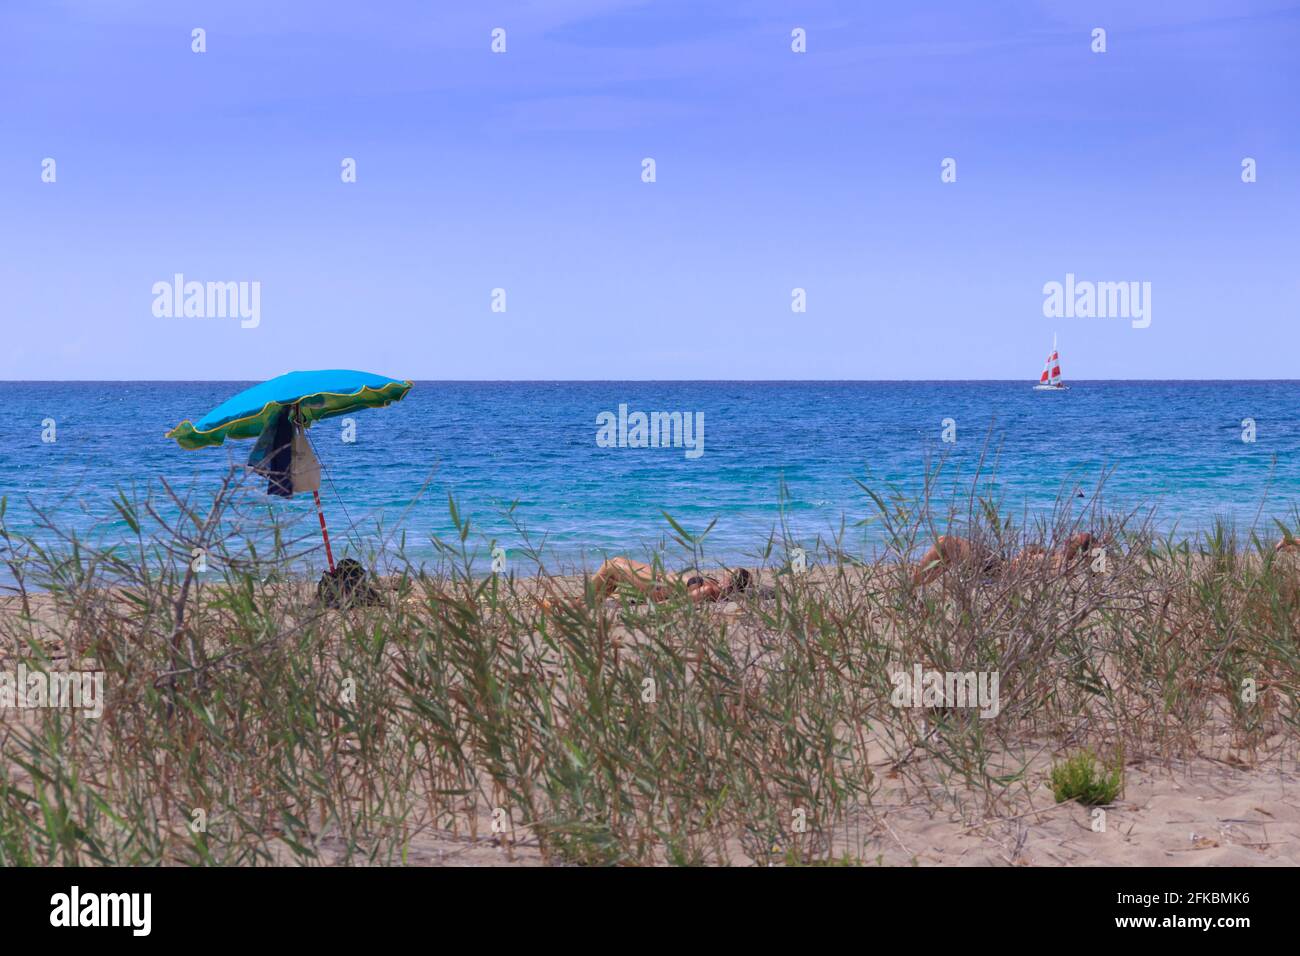 Relax on the beach, Apulia (Italy). Sunbathing tourists with lonely umbrella. Stock Photo